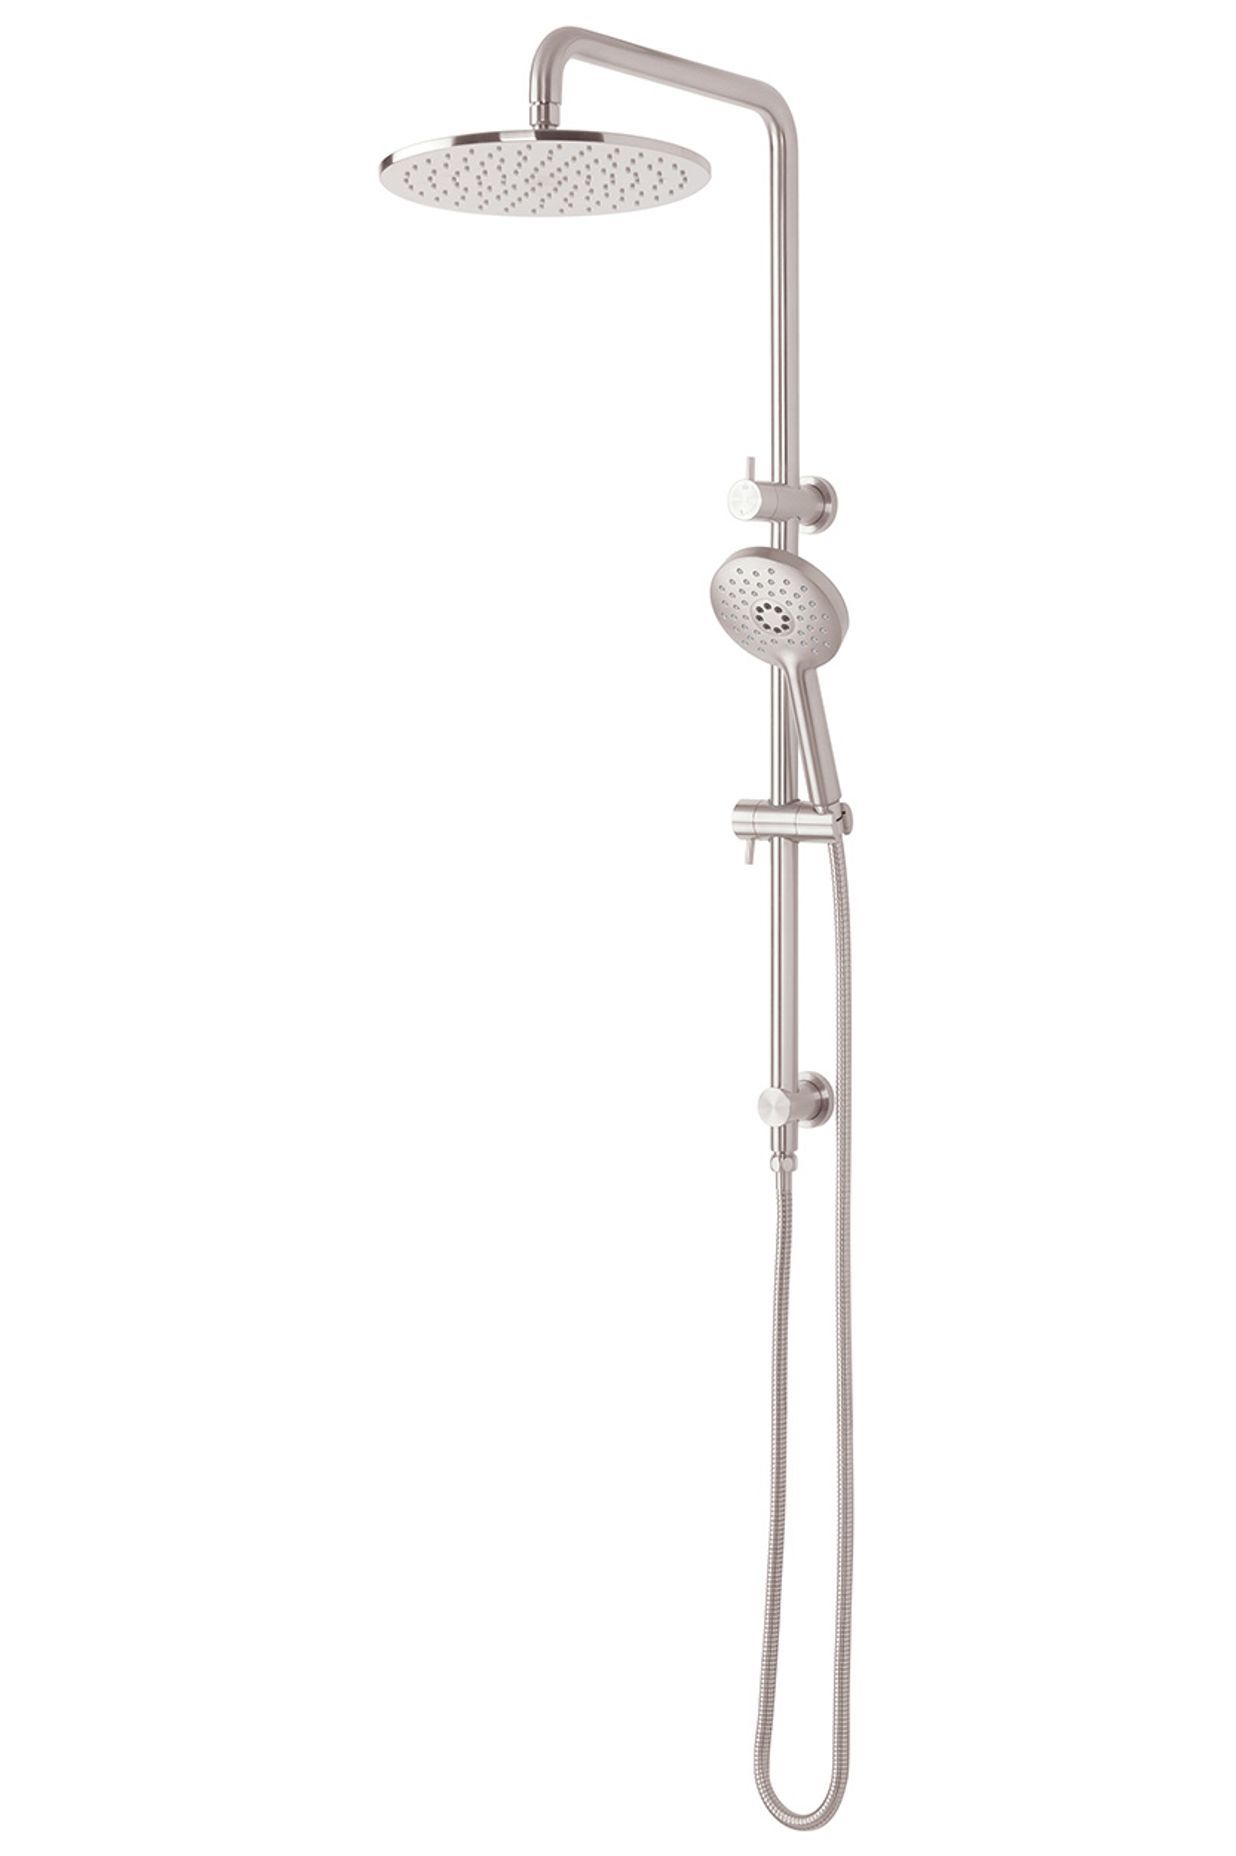 The Storm Double Head shower is available in a variety of colours and finishes.